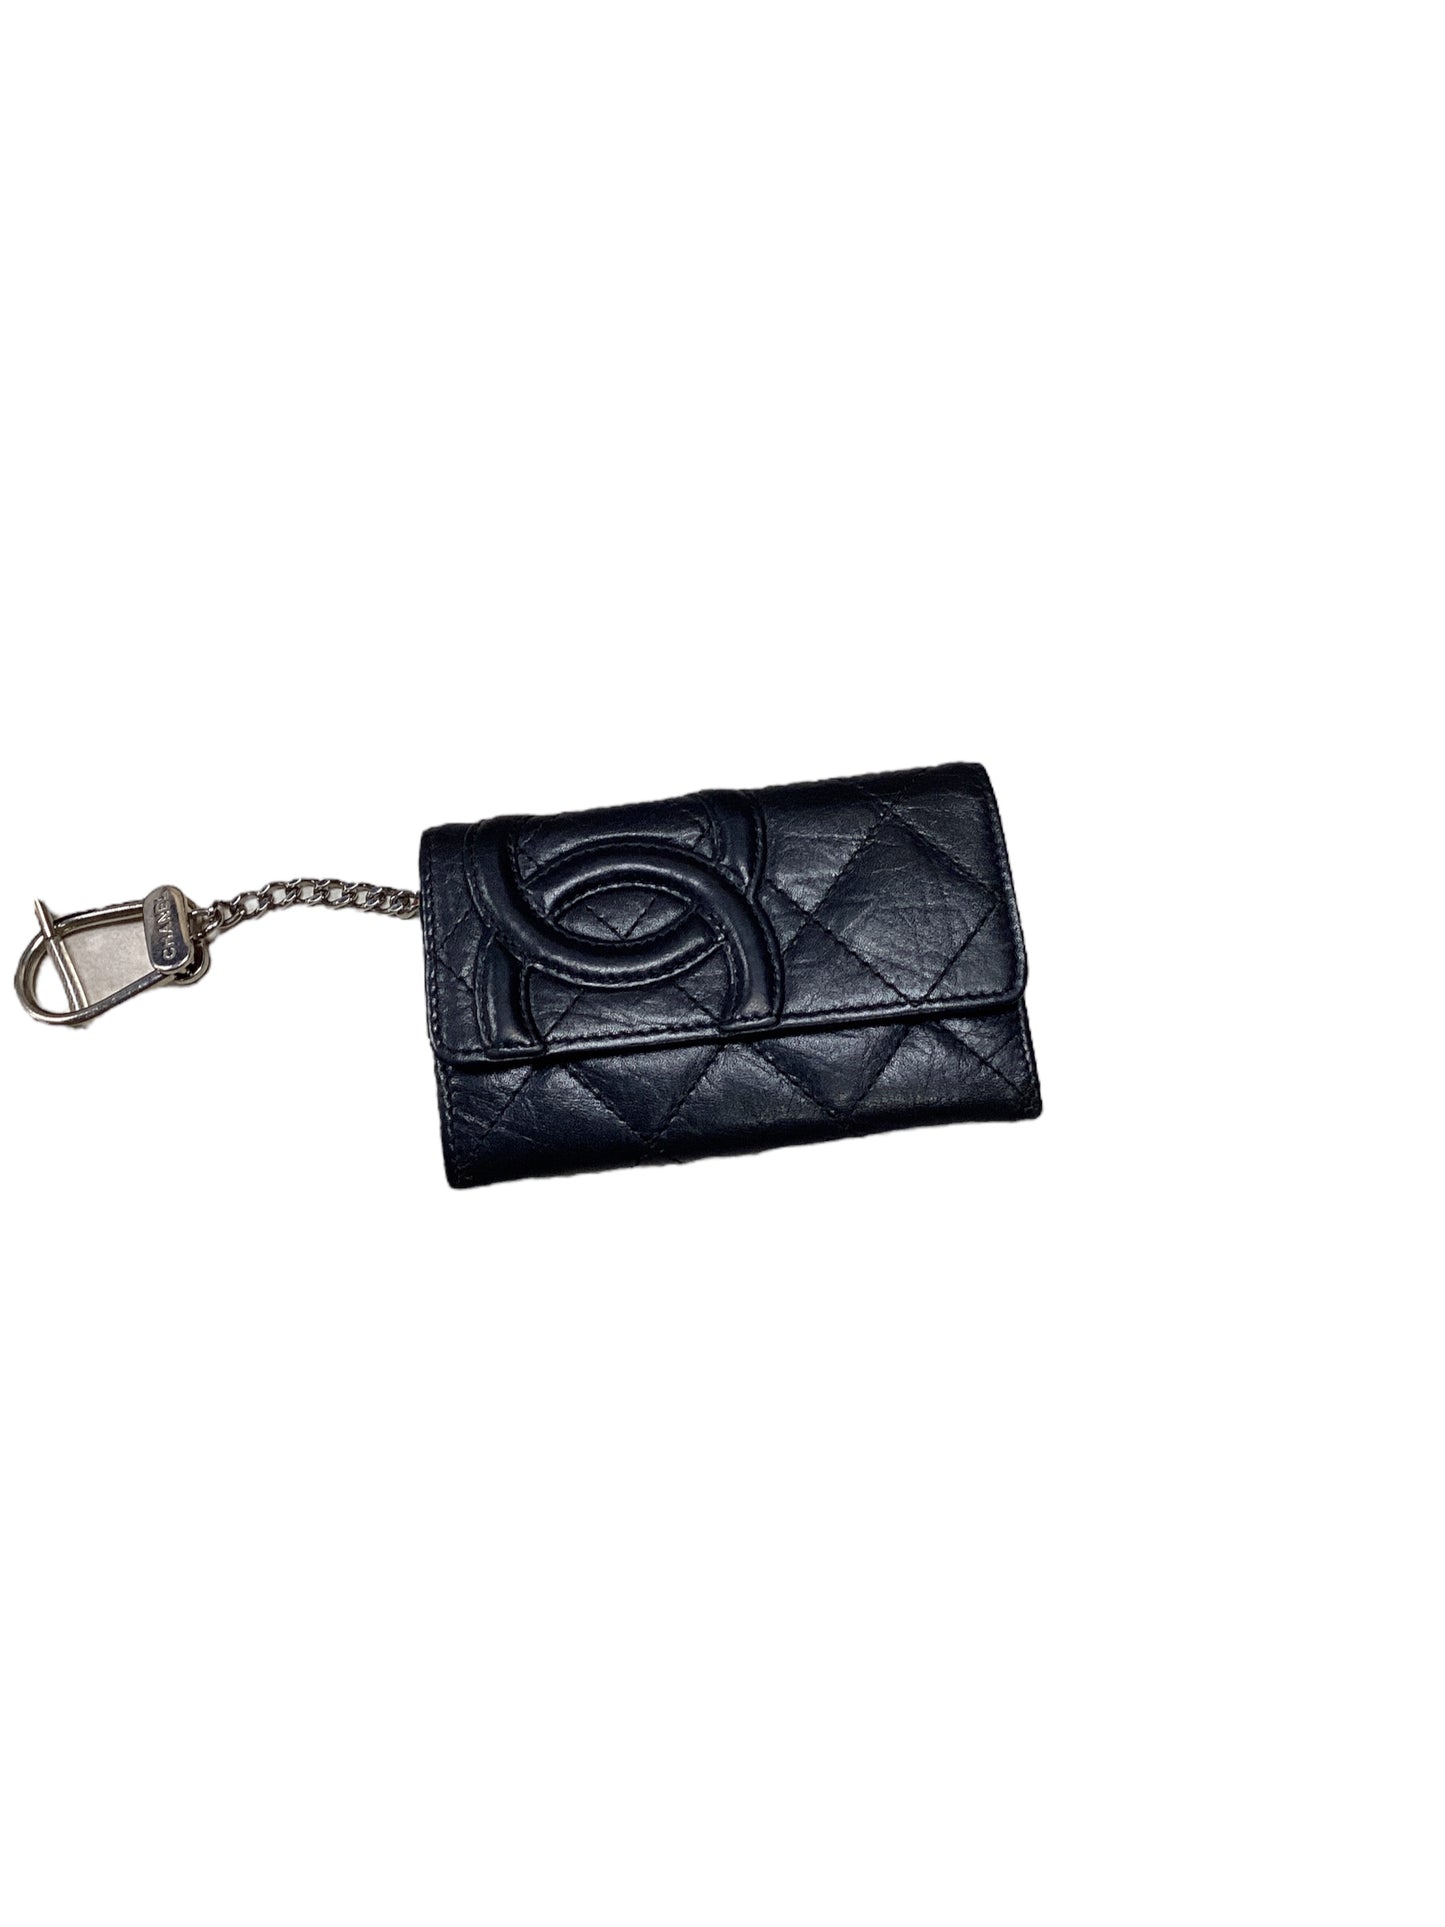 Wallet Designer By Chanel  Size: Small